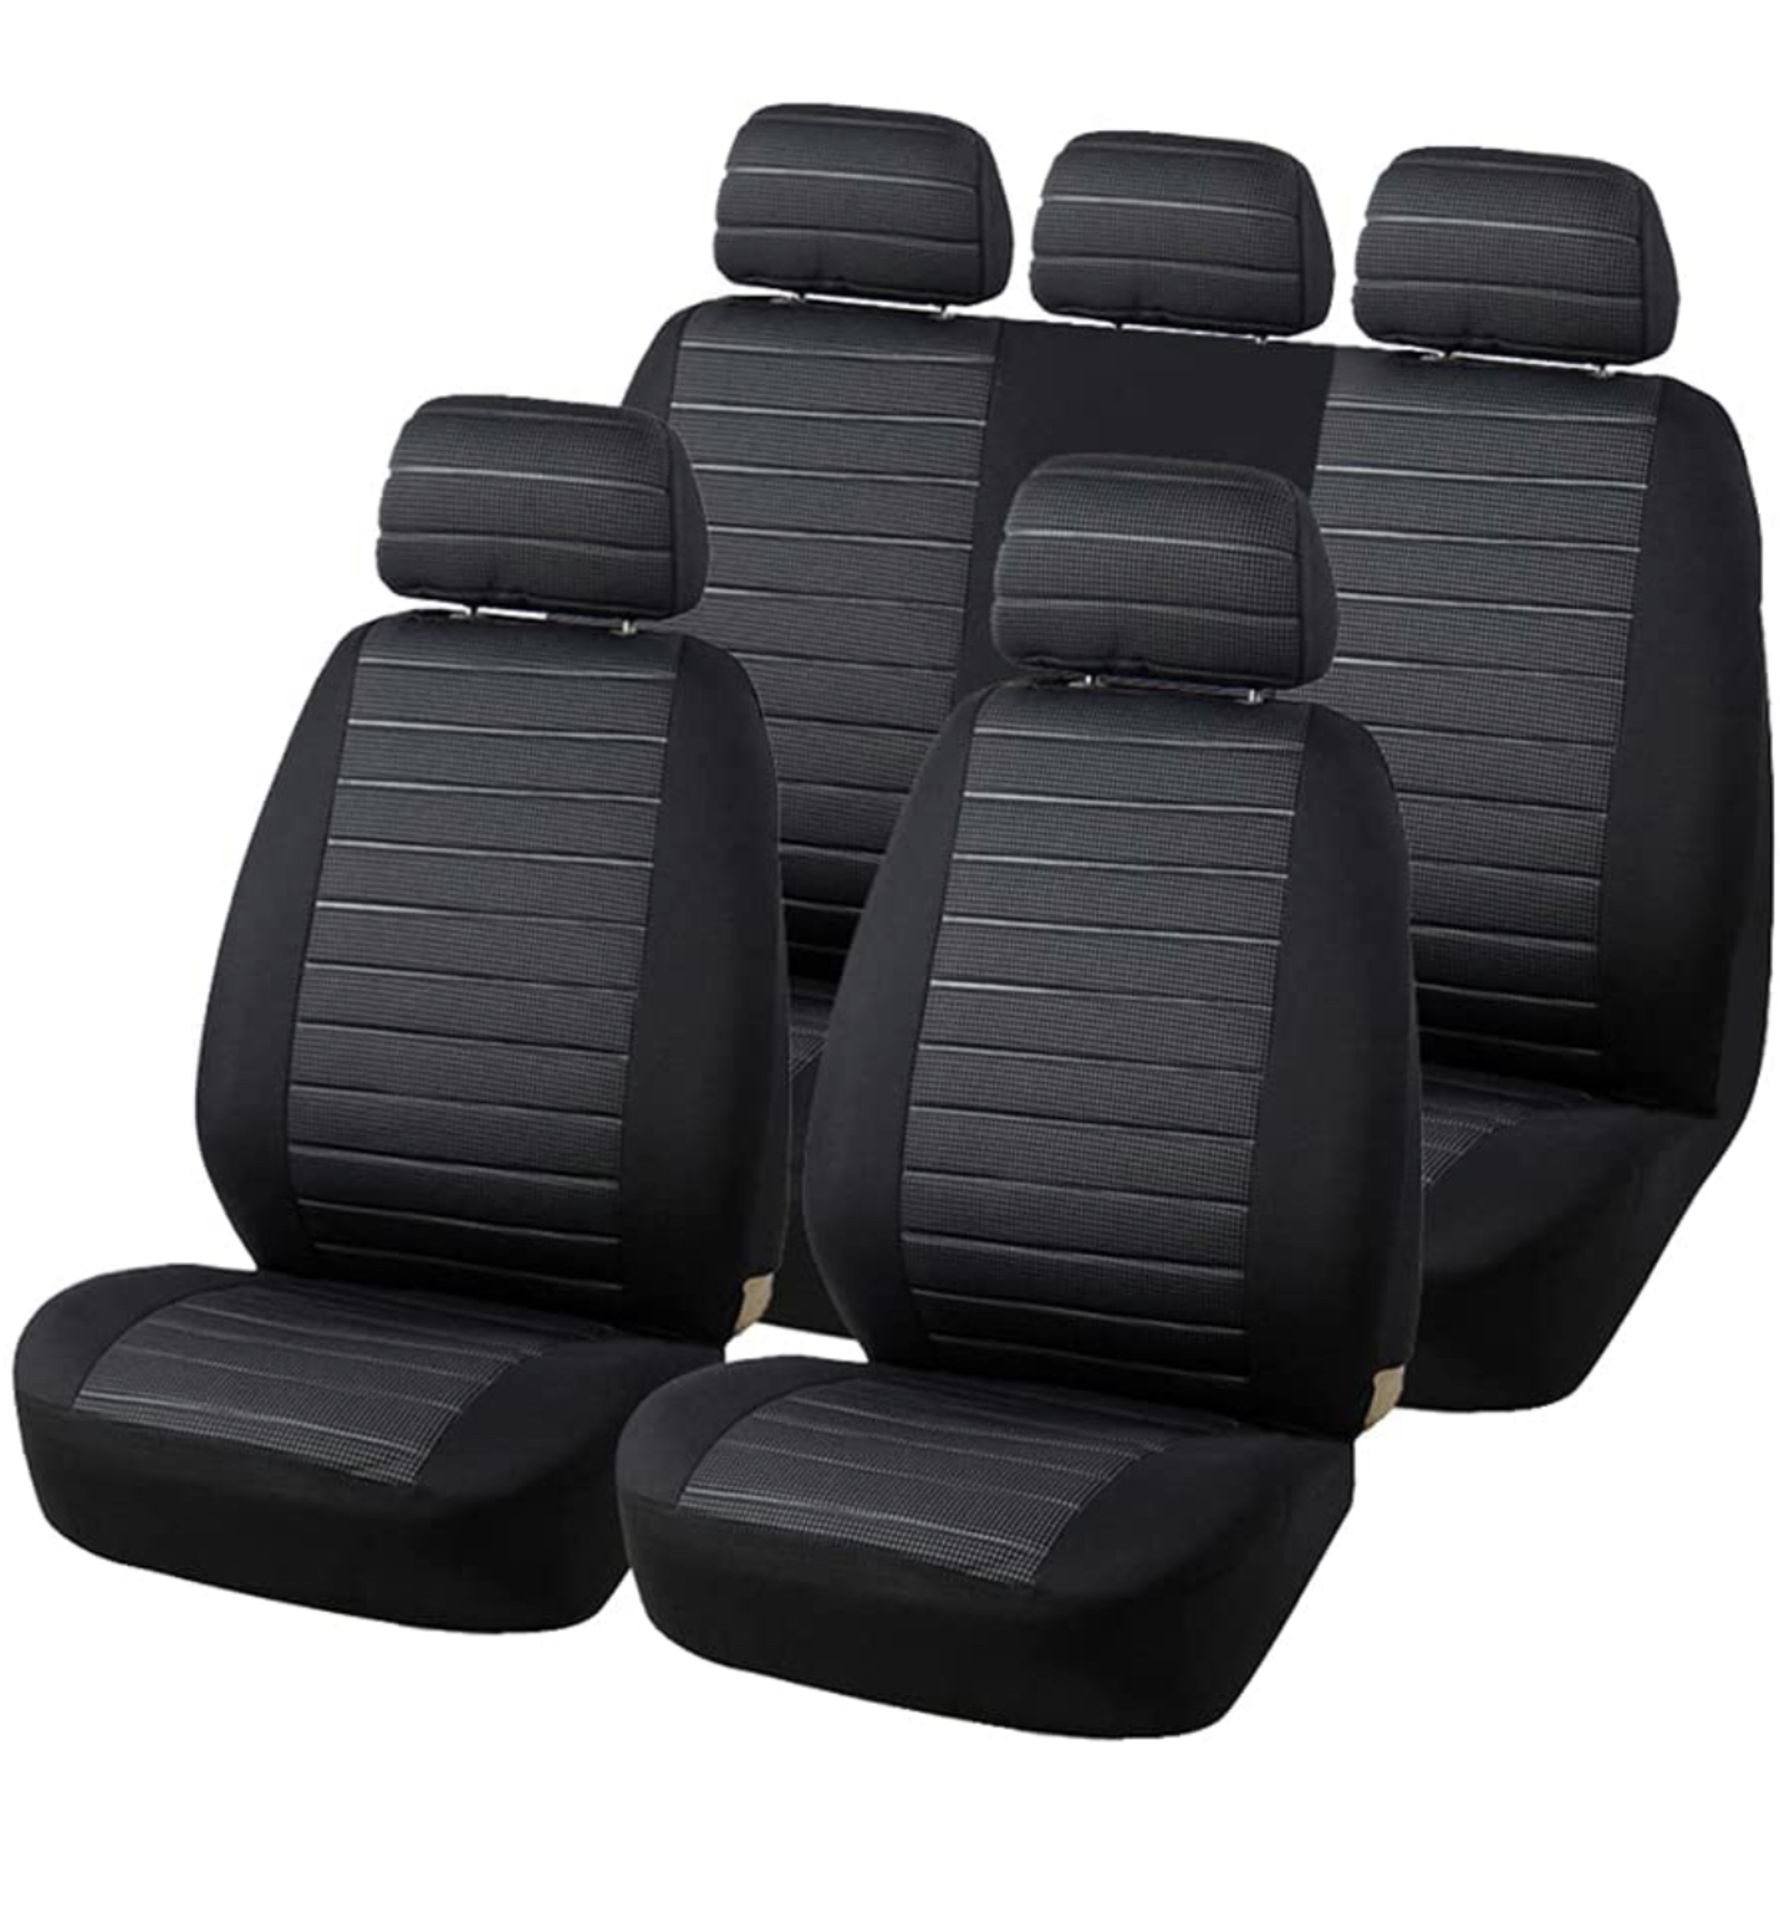 Toyoun Universal Car Seat Covers Full Set with 2 Extra Front Seat Covers